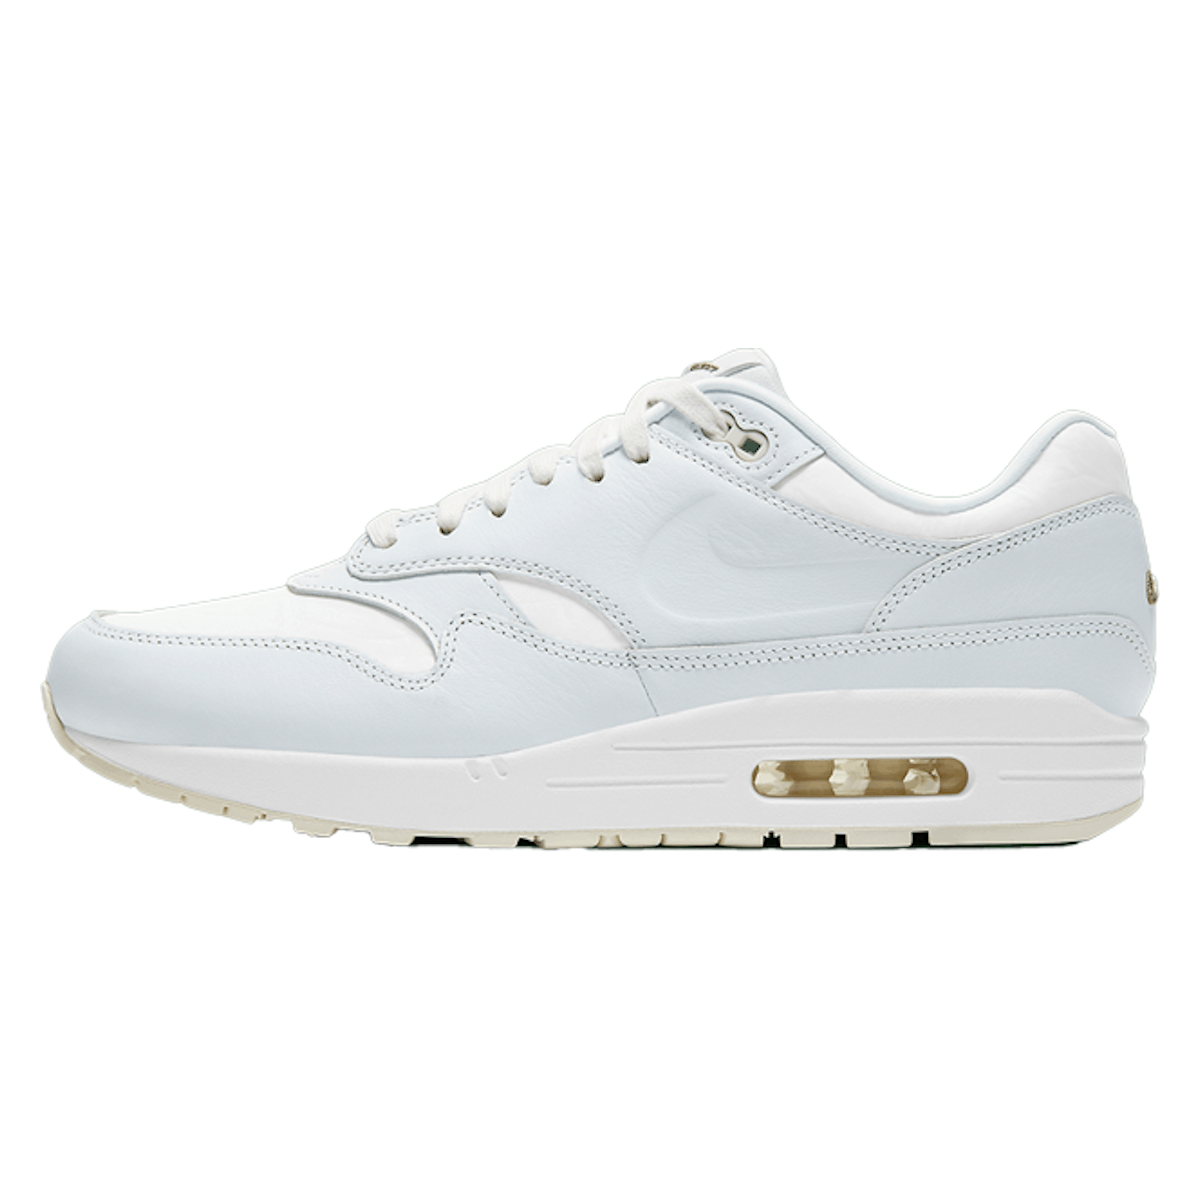 Nike Air Max 1 "Yours​"